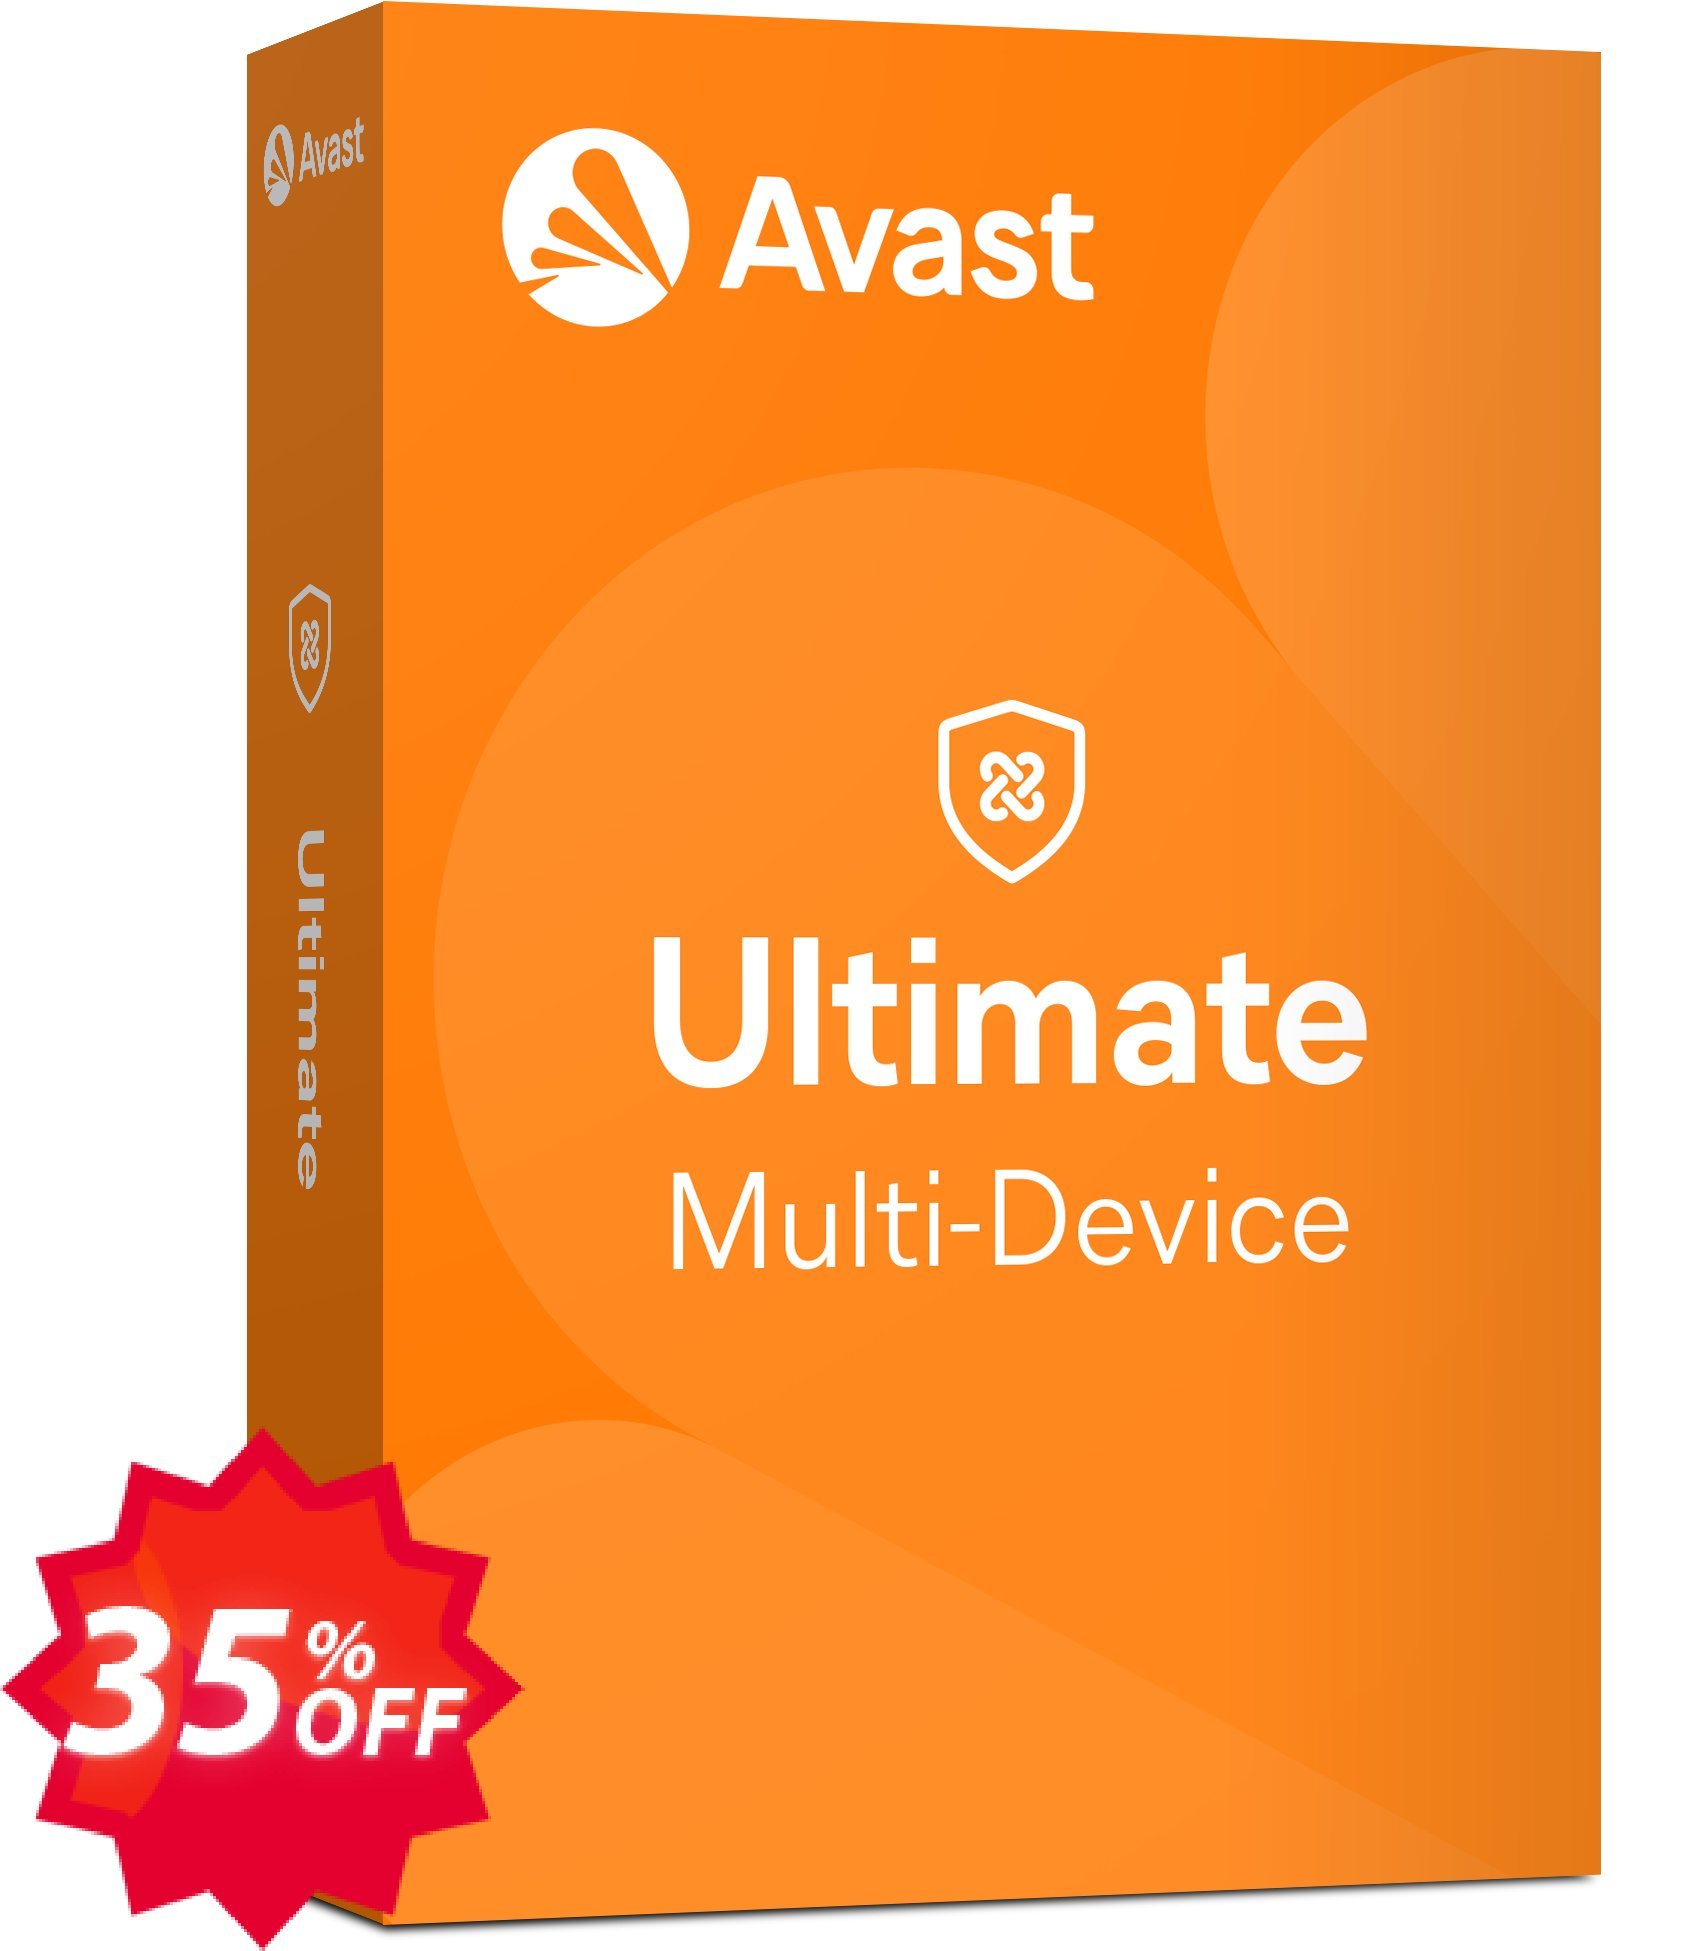 Avast Ultimate 10 Devices Coupon code 35% discount 